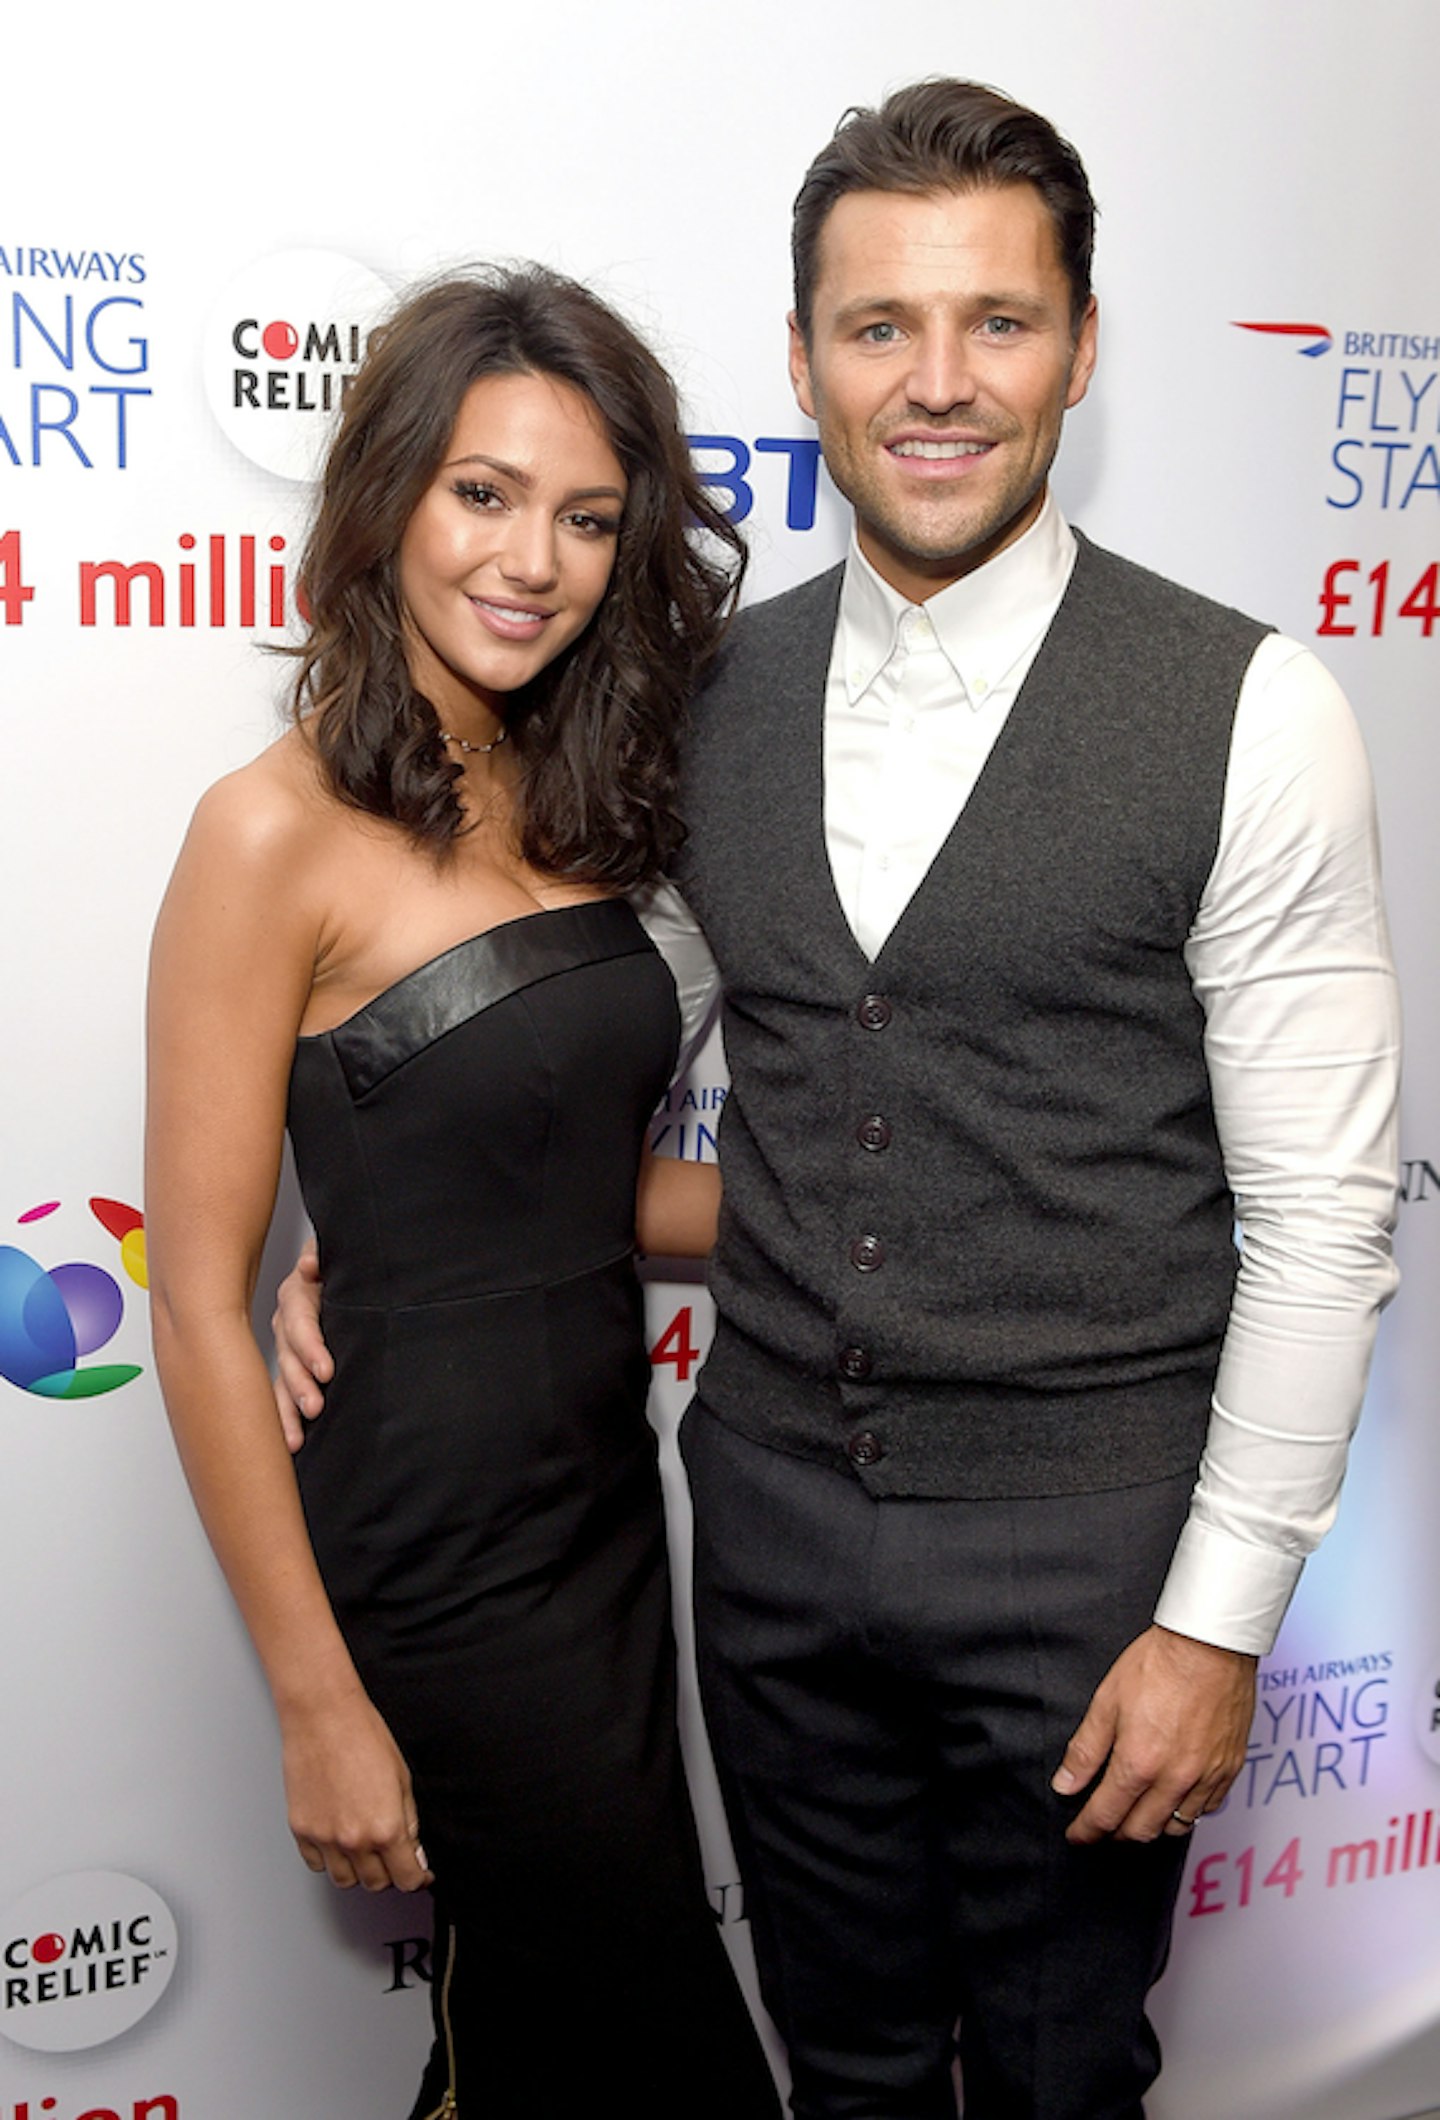 Michelle and Mark Wright at an award ceromony